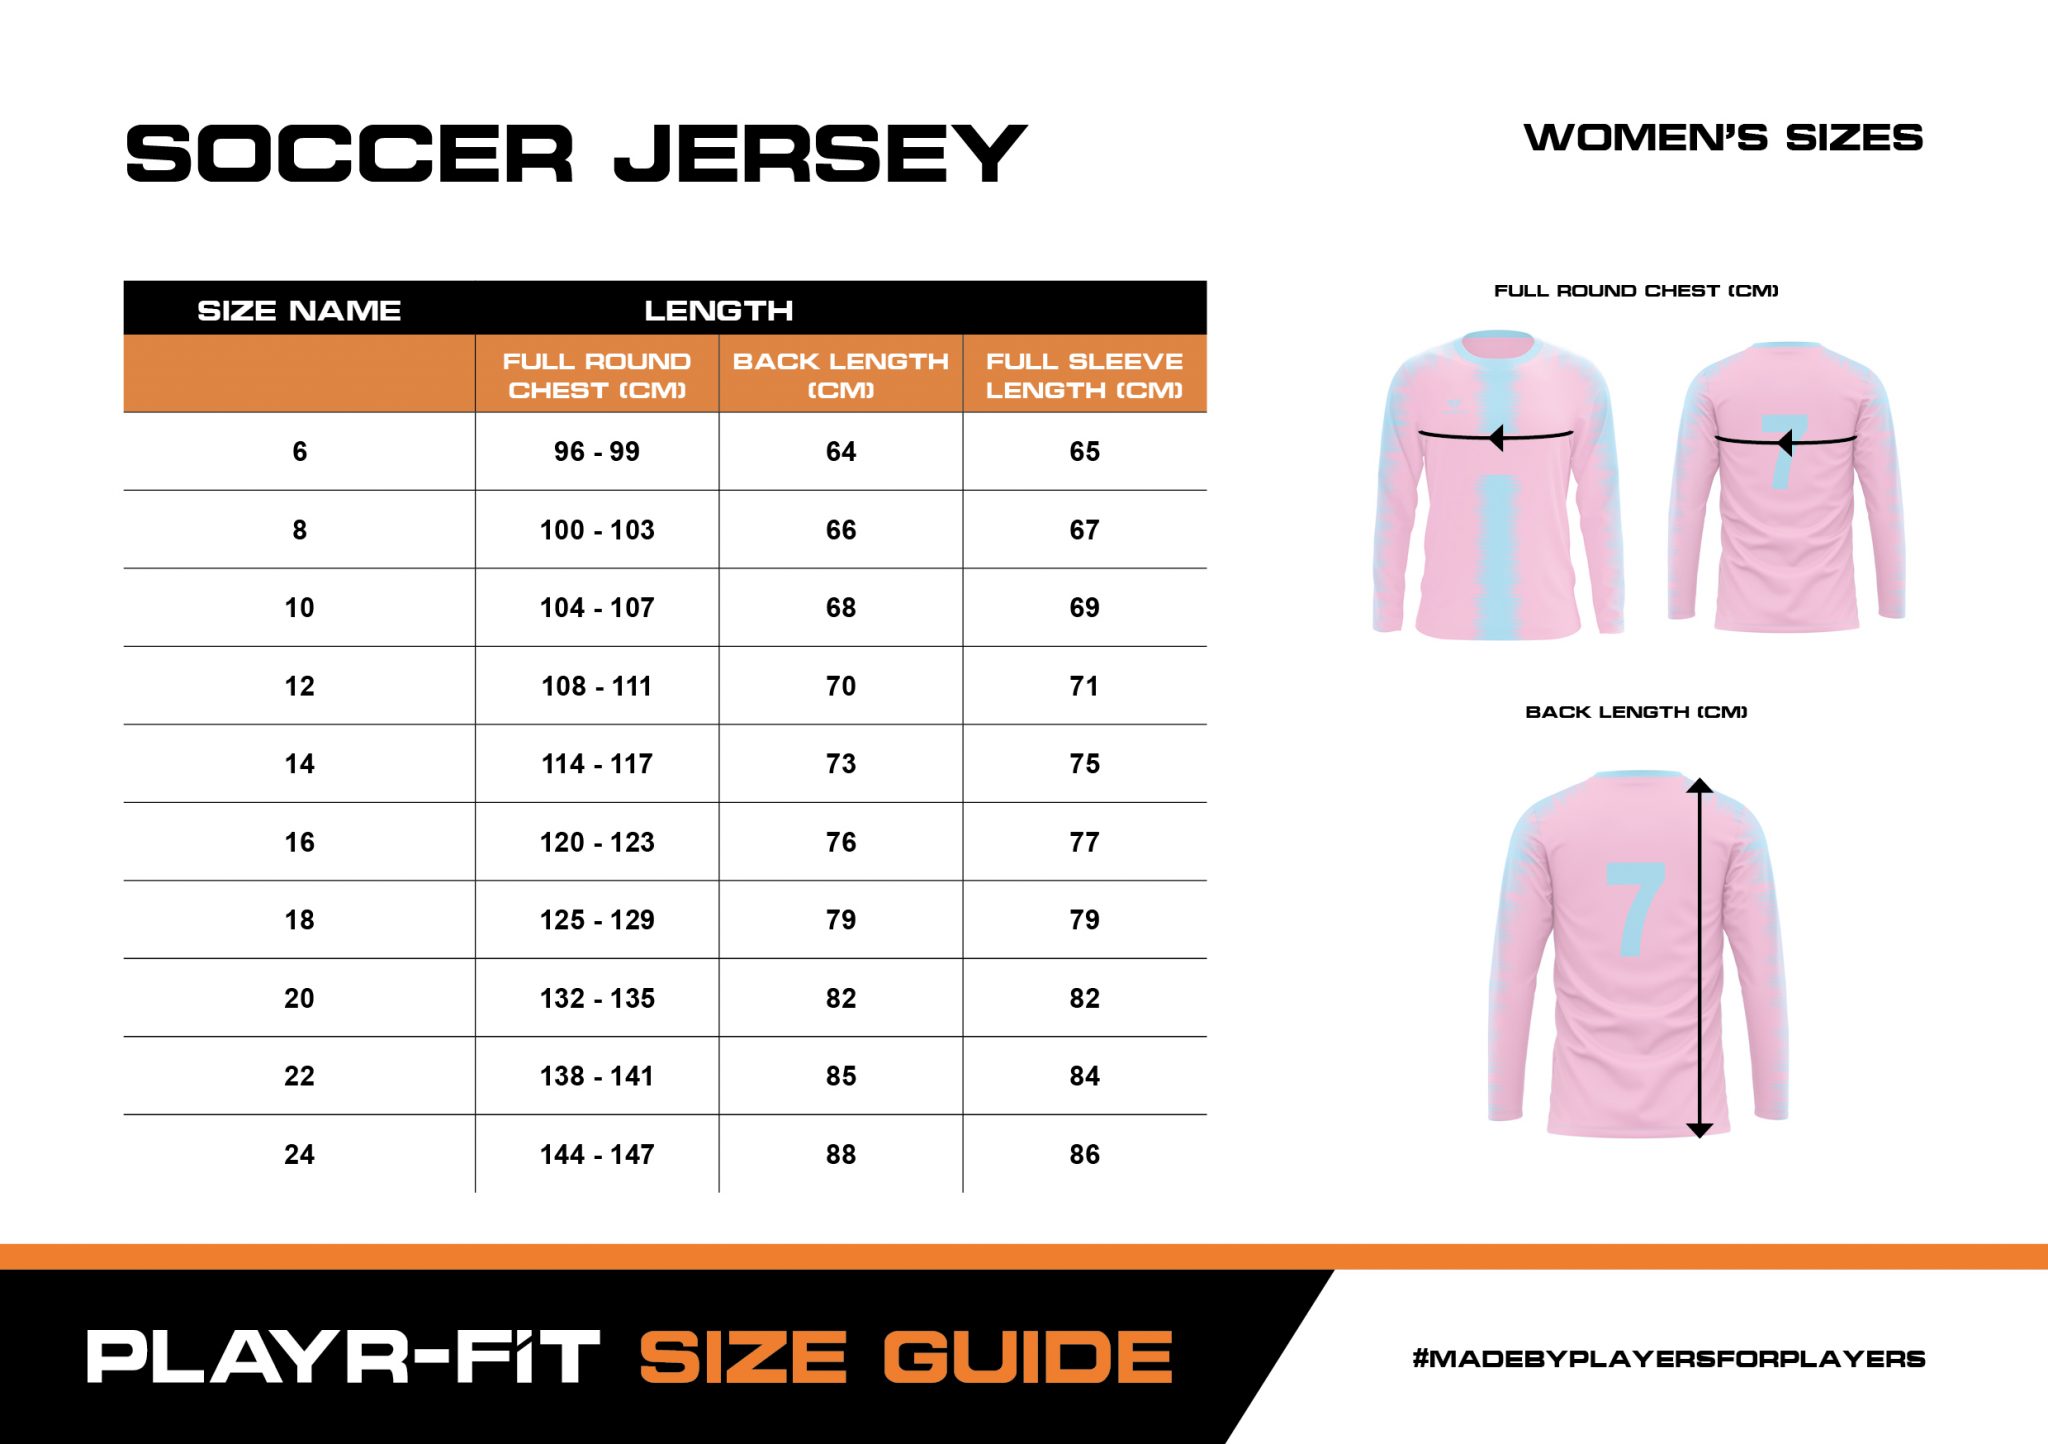 Youth Soccer Size Chart